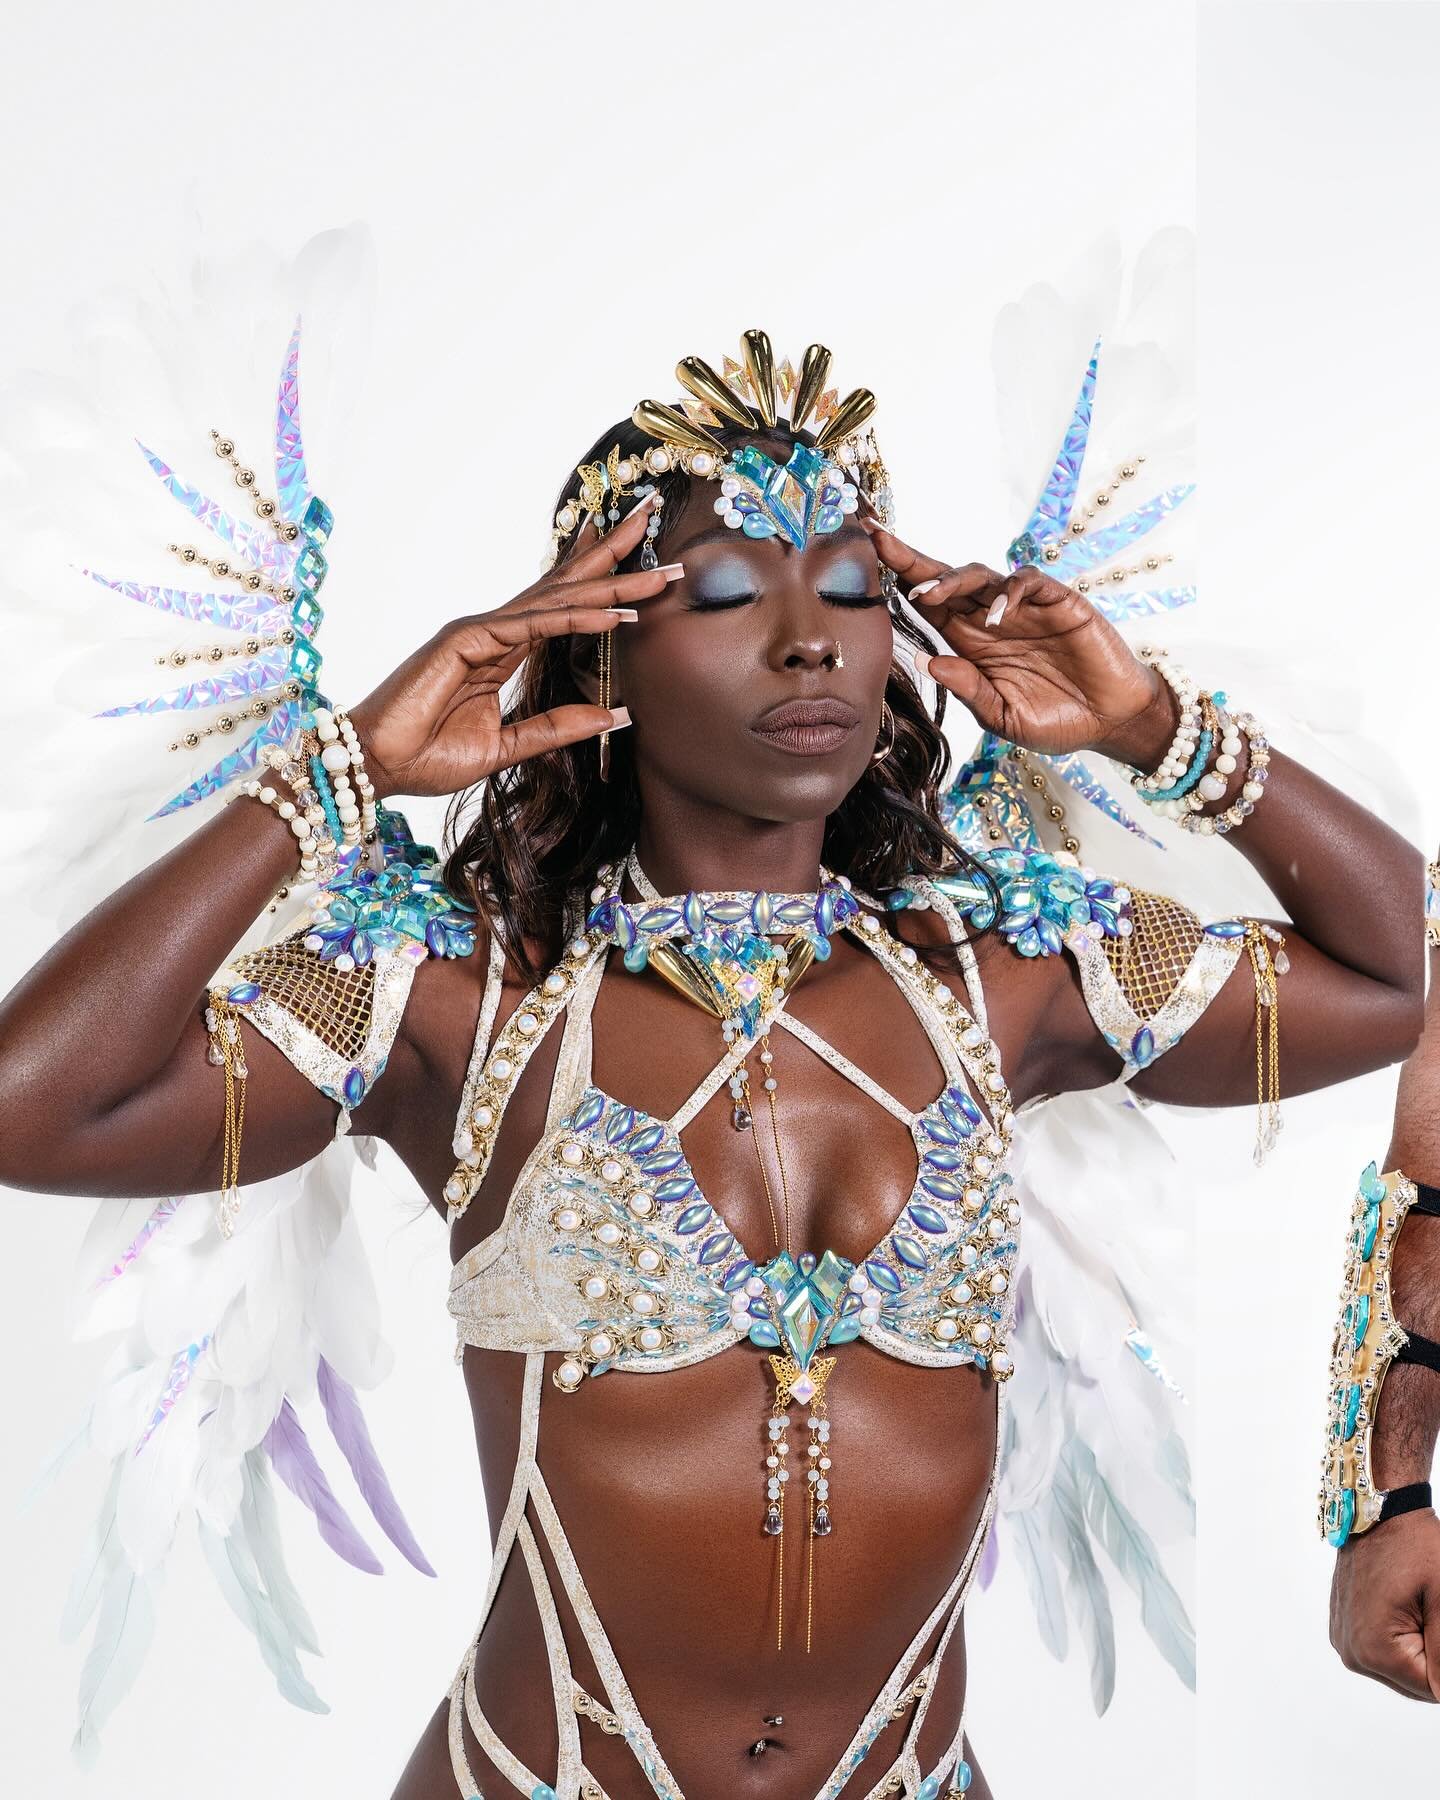 Saldenah Carnival 2024 presents Fly High for Toronto Caribbean Carnival
Pure Elevation
.
Band:@saldenahcarnival
Section name: Pure Elevation
Design:@sammyfevermas
Produced by: @fevermas 
Makeup: @_tmface
Models: @donnysense @_isatou_ @ziippytonezzzzz